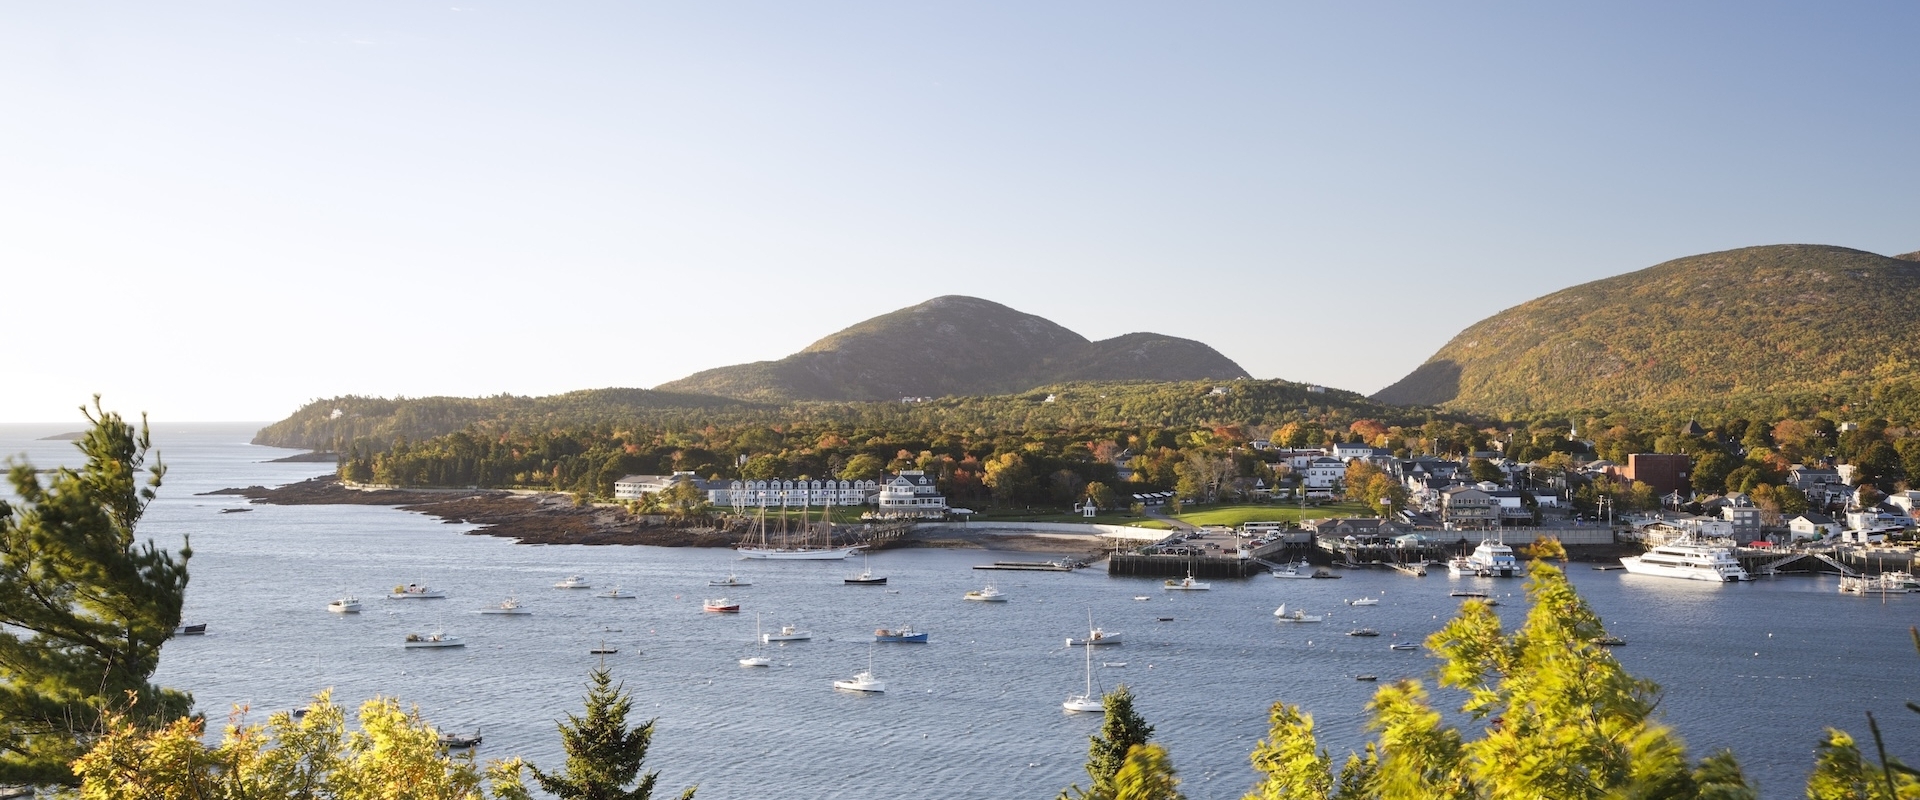 A view of Bar Harbor from the water